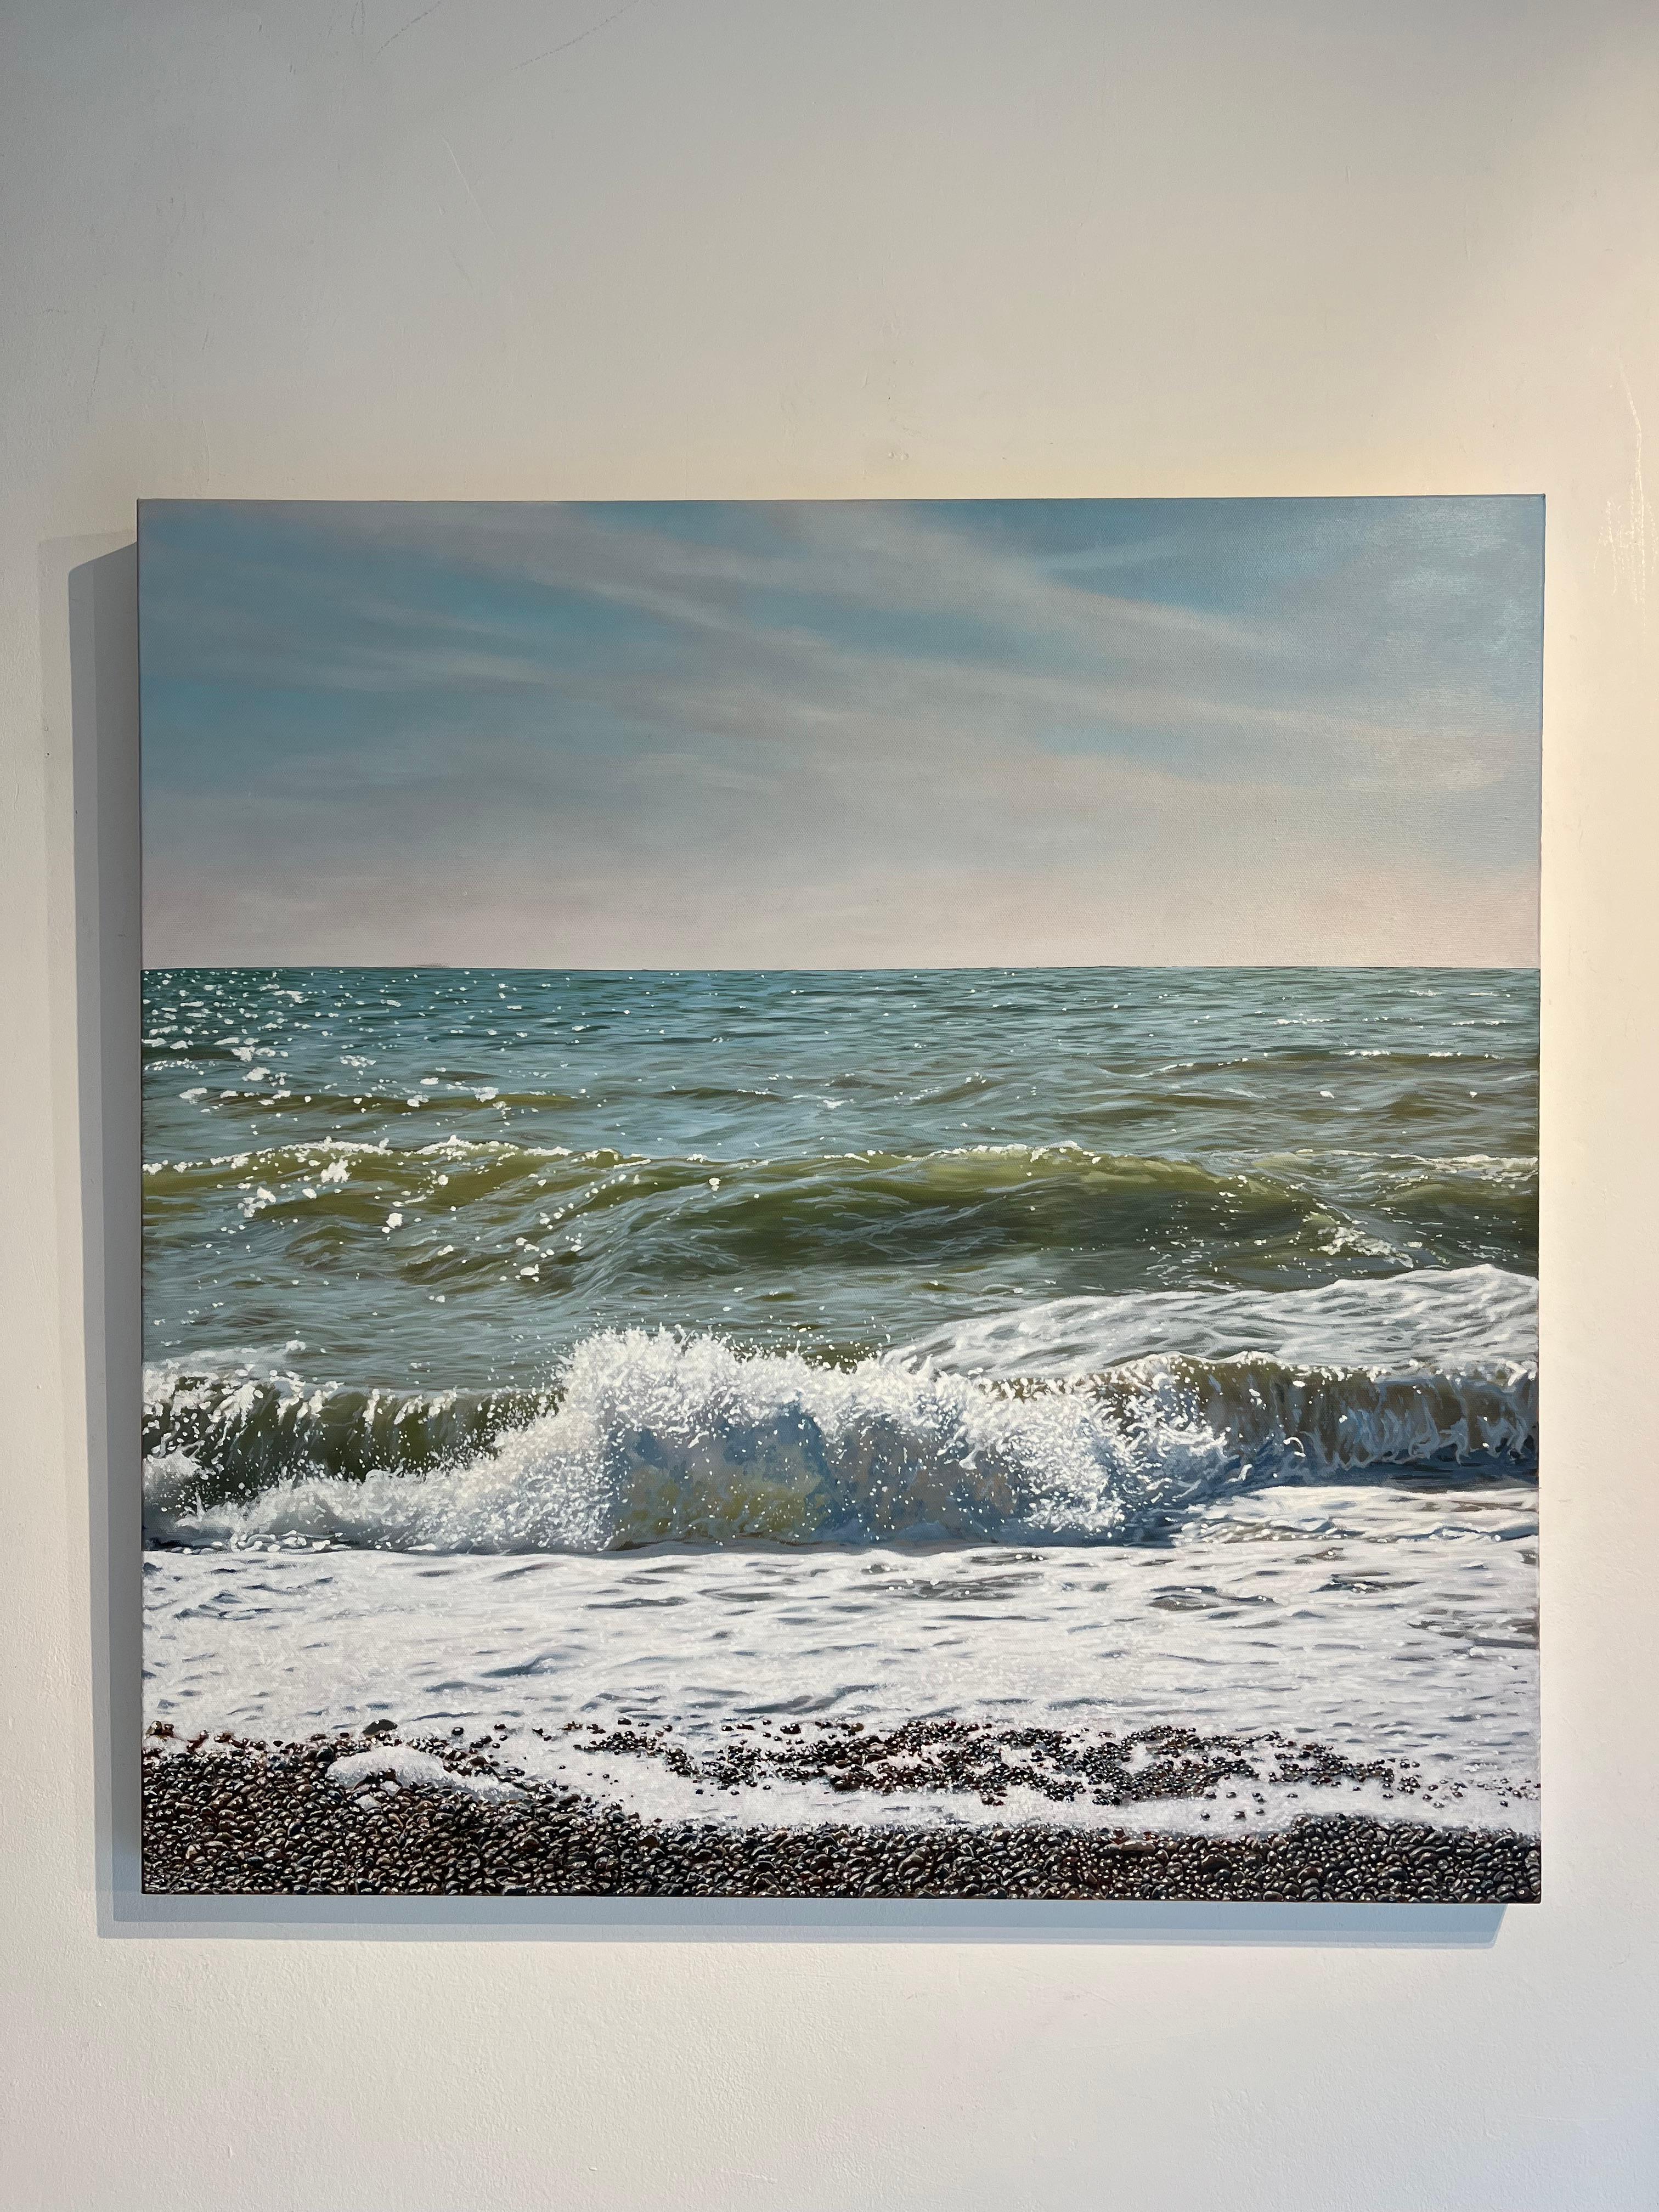 Breaking Wave-original hyper realism seascape oil painting-contemporary Art - Painting by Christopher Witchall